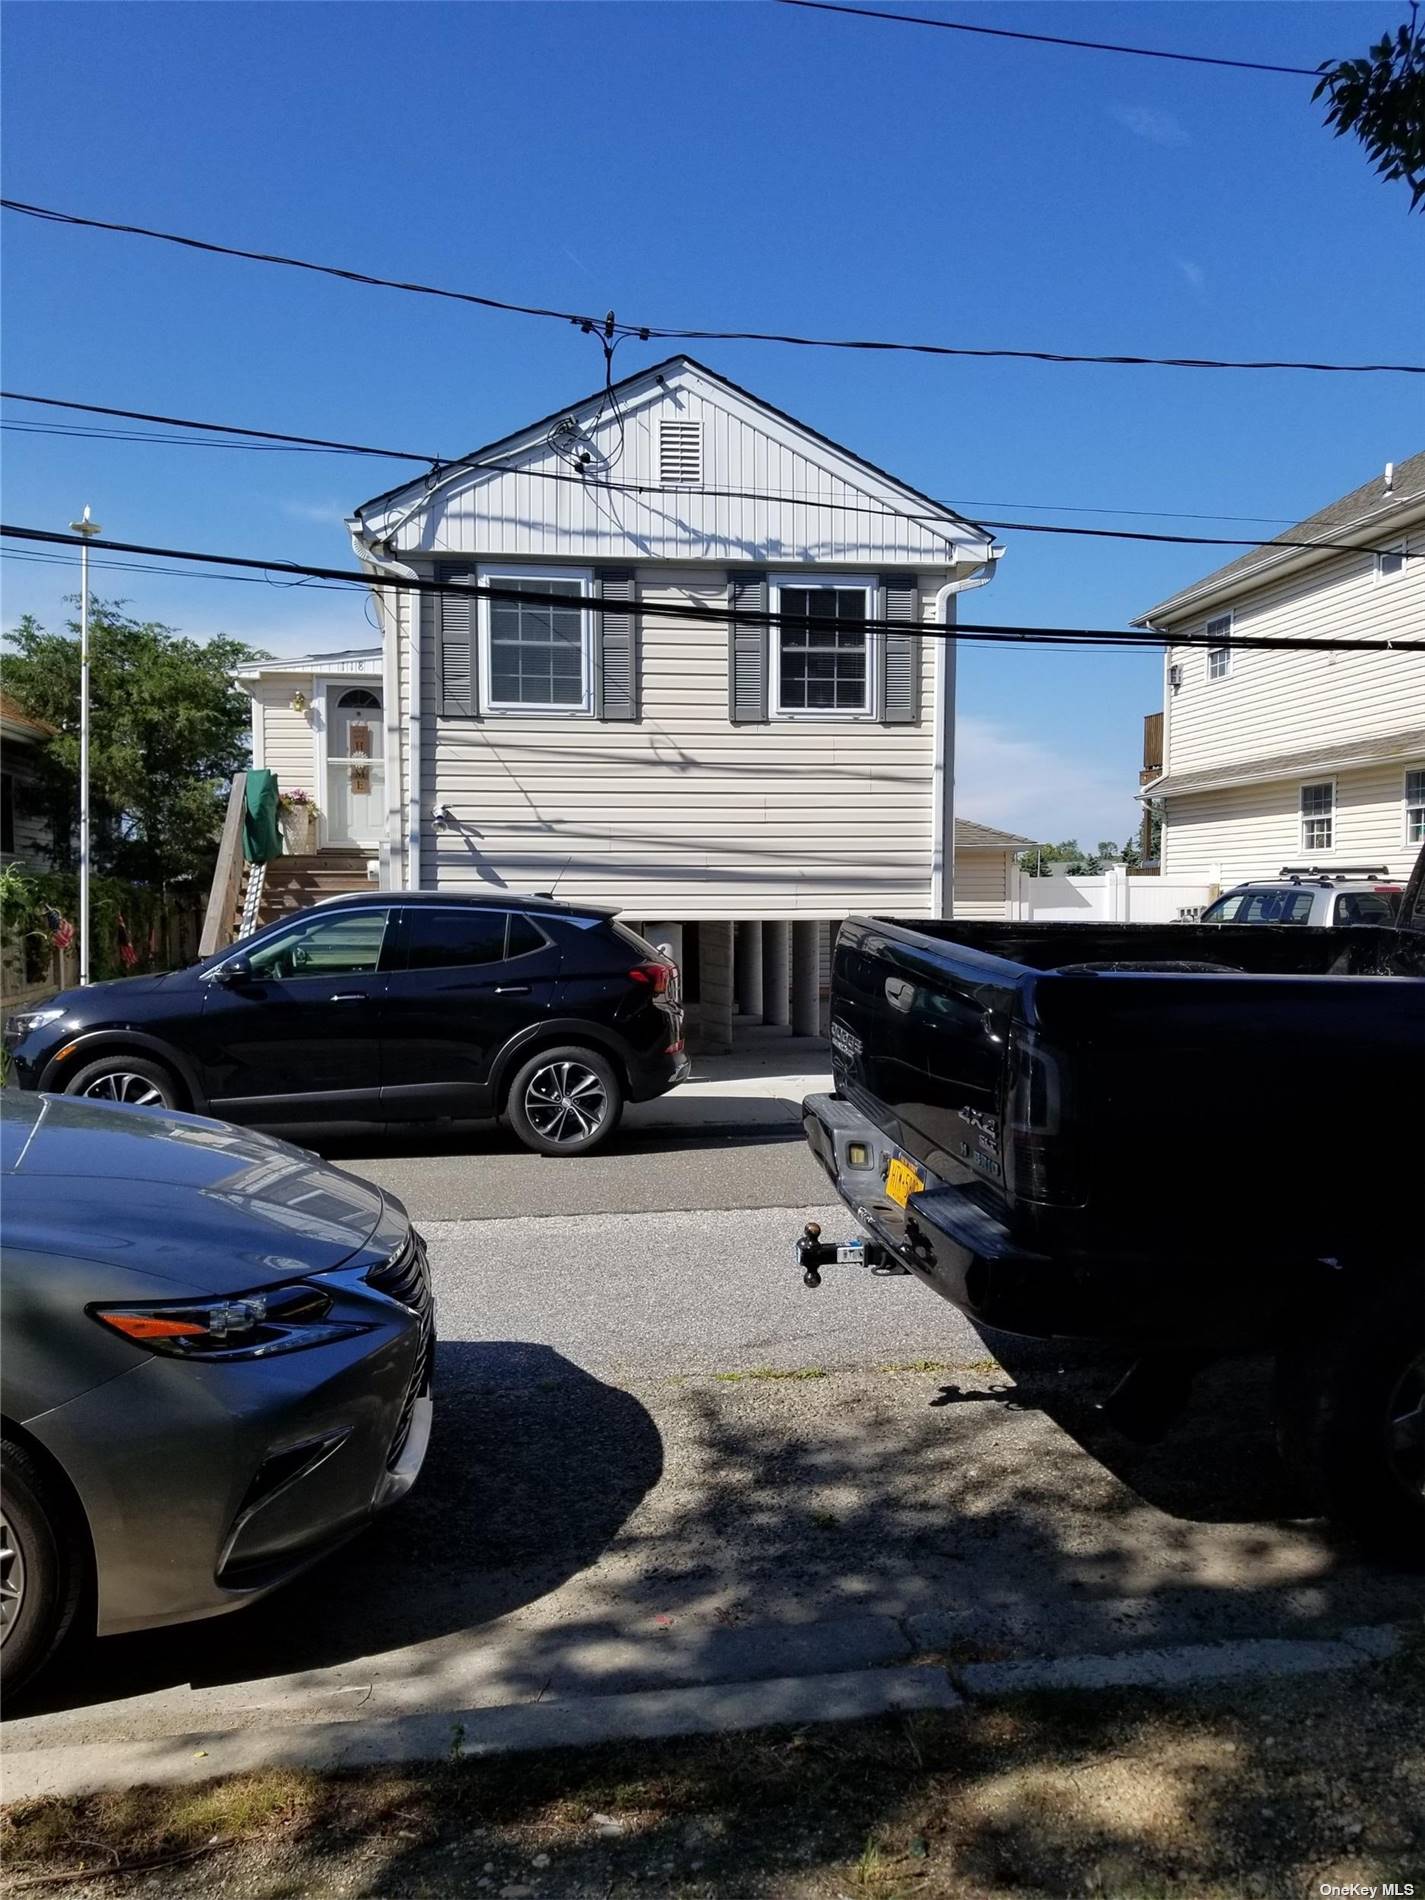 a front view of a house with cars parked